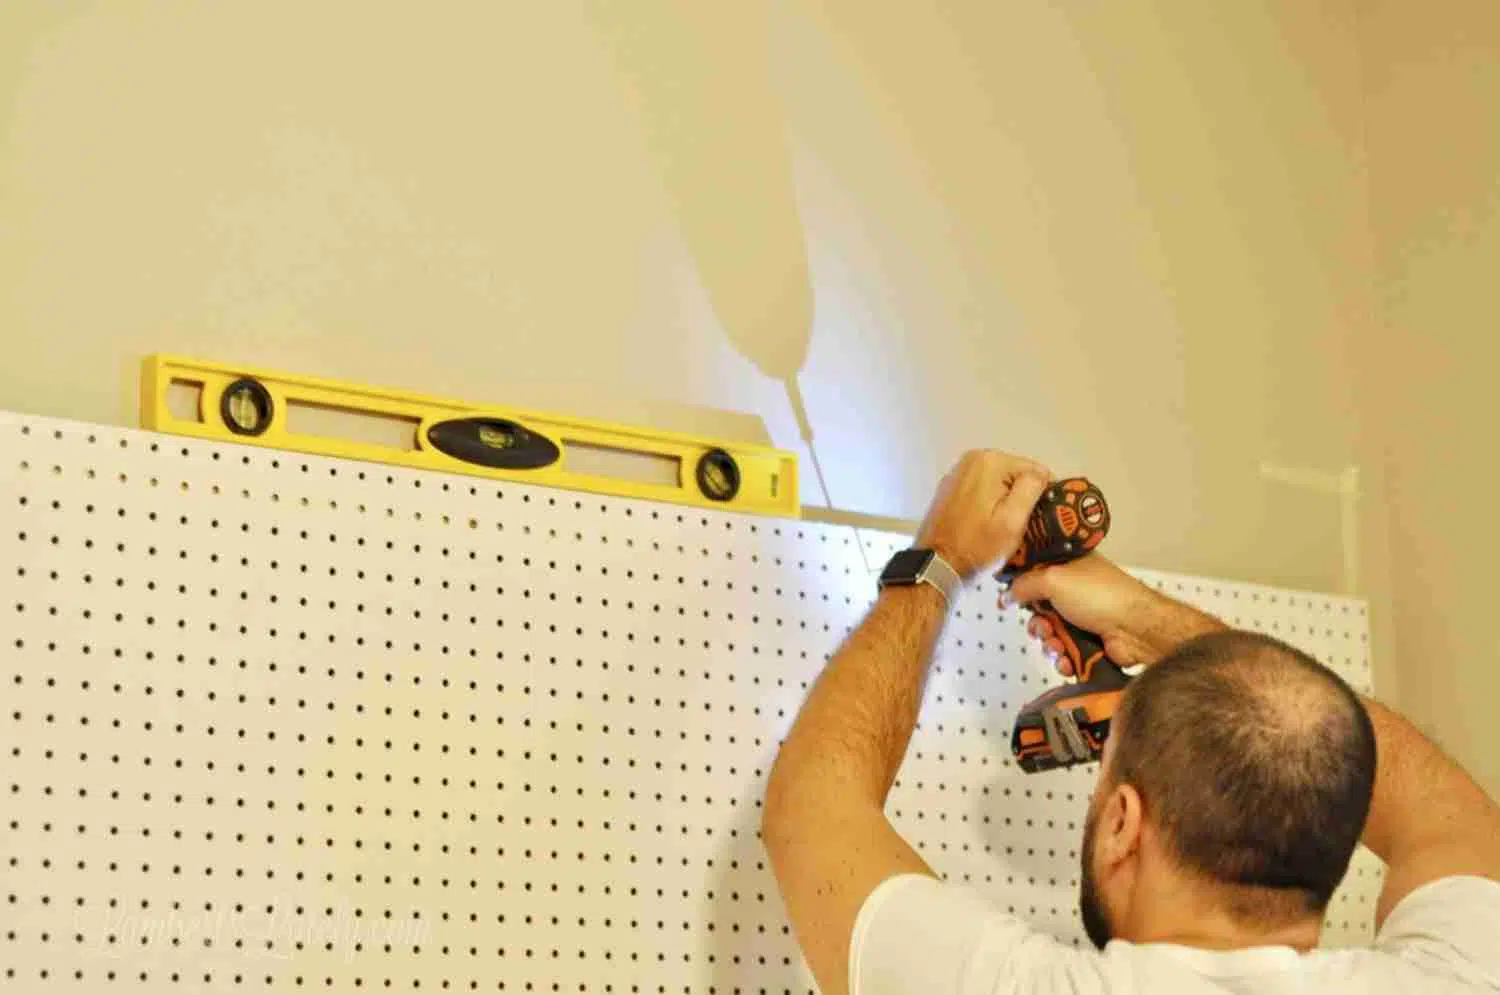 level sitting on top of pegboard, man drilling board into wall